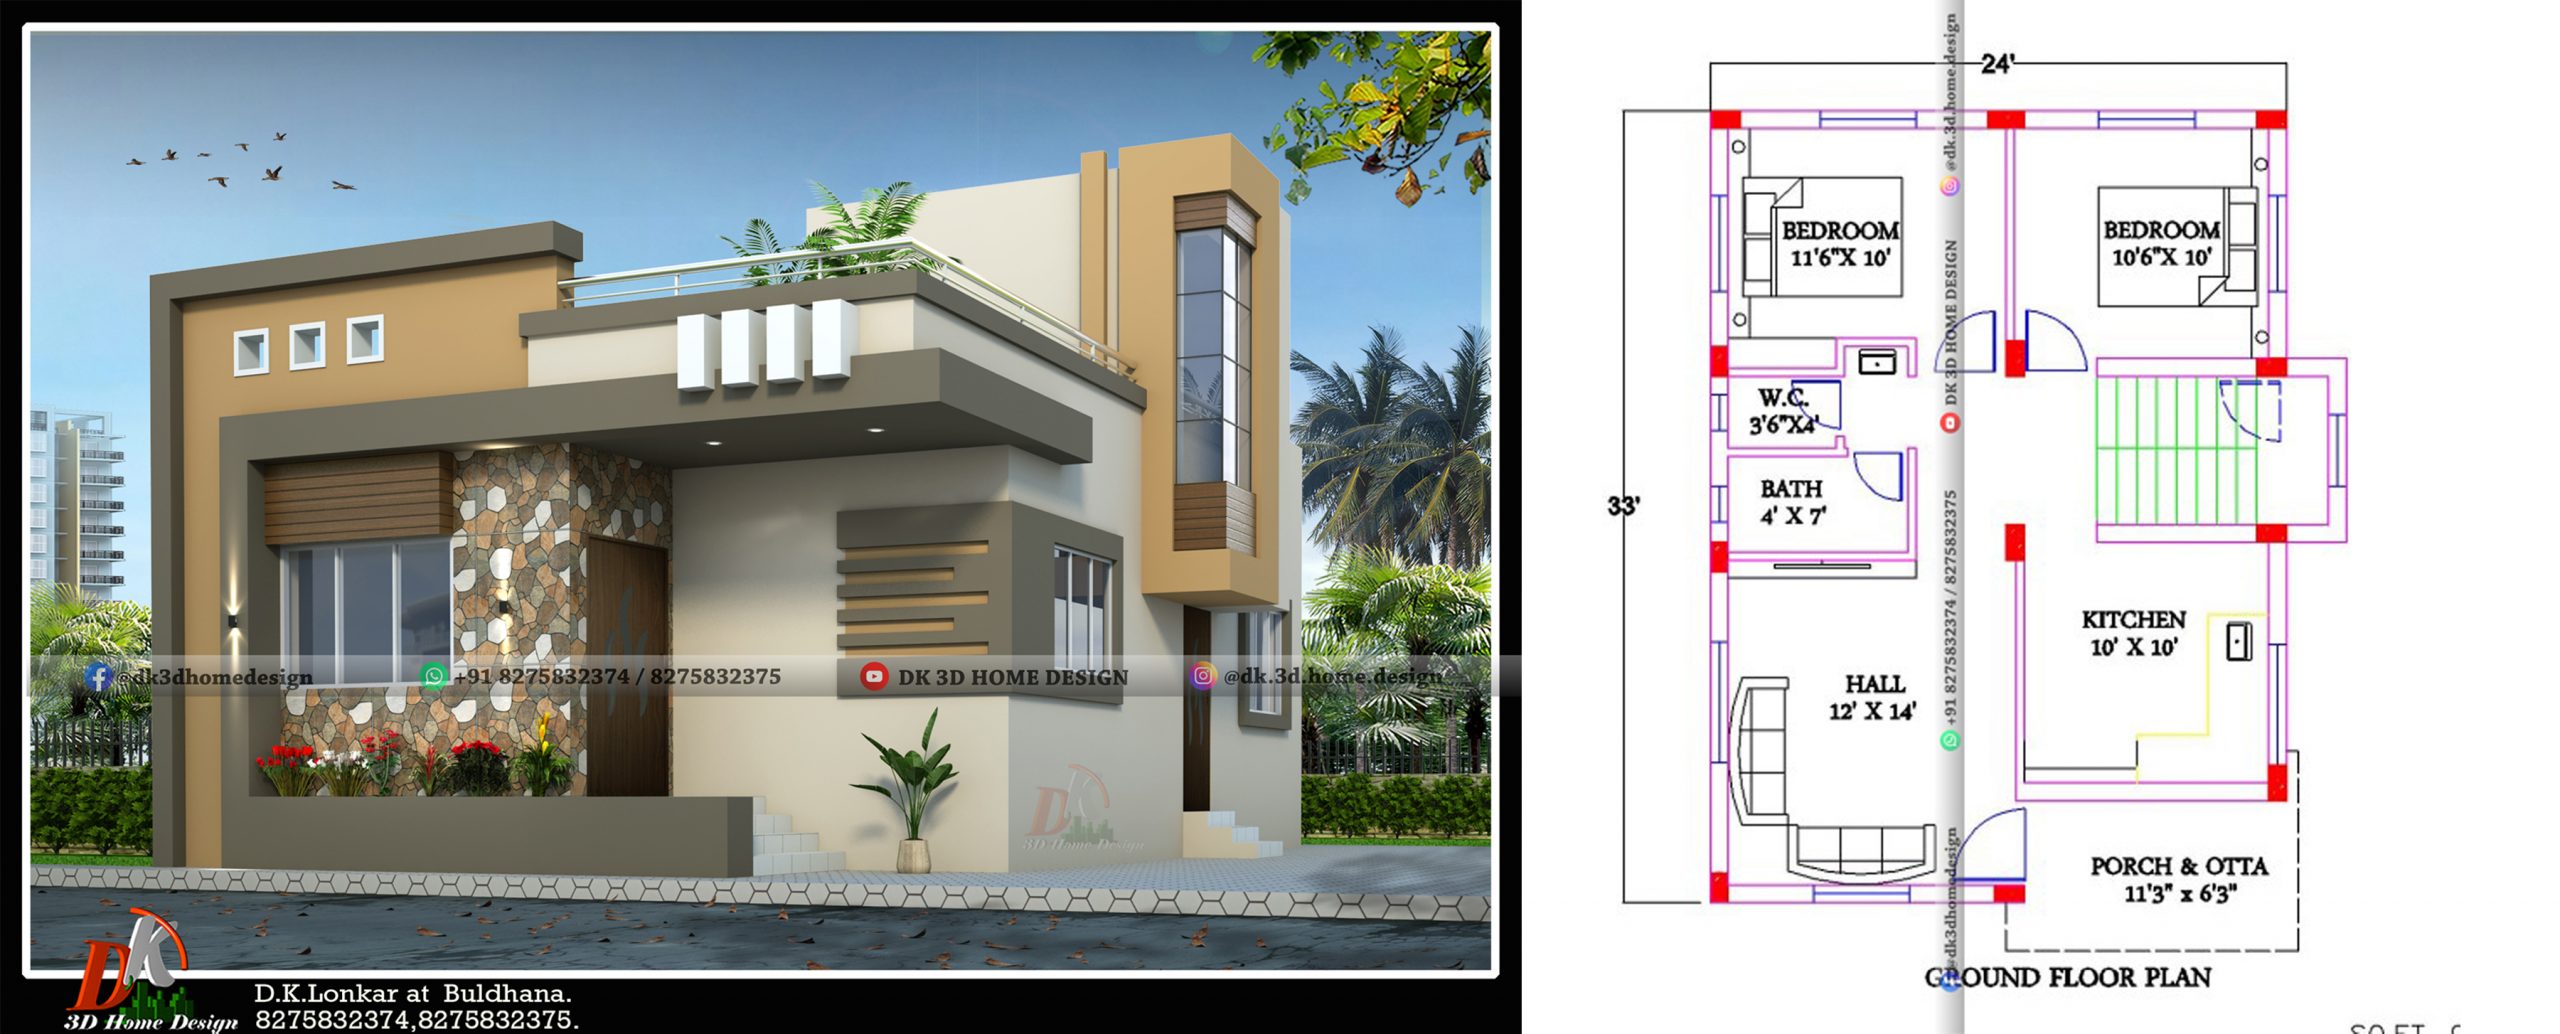 25*33 house plan with 825 square feet house design